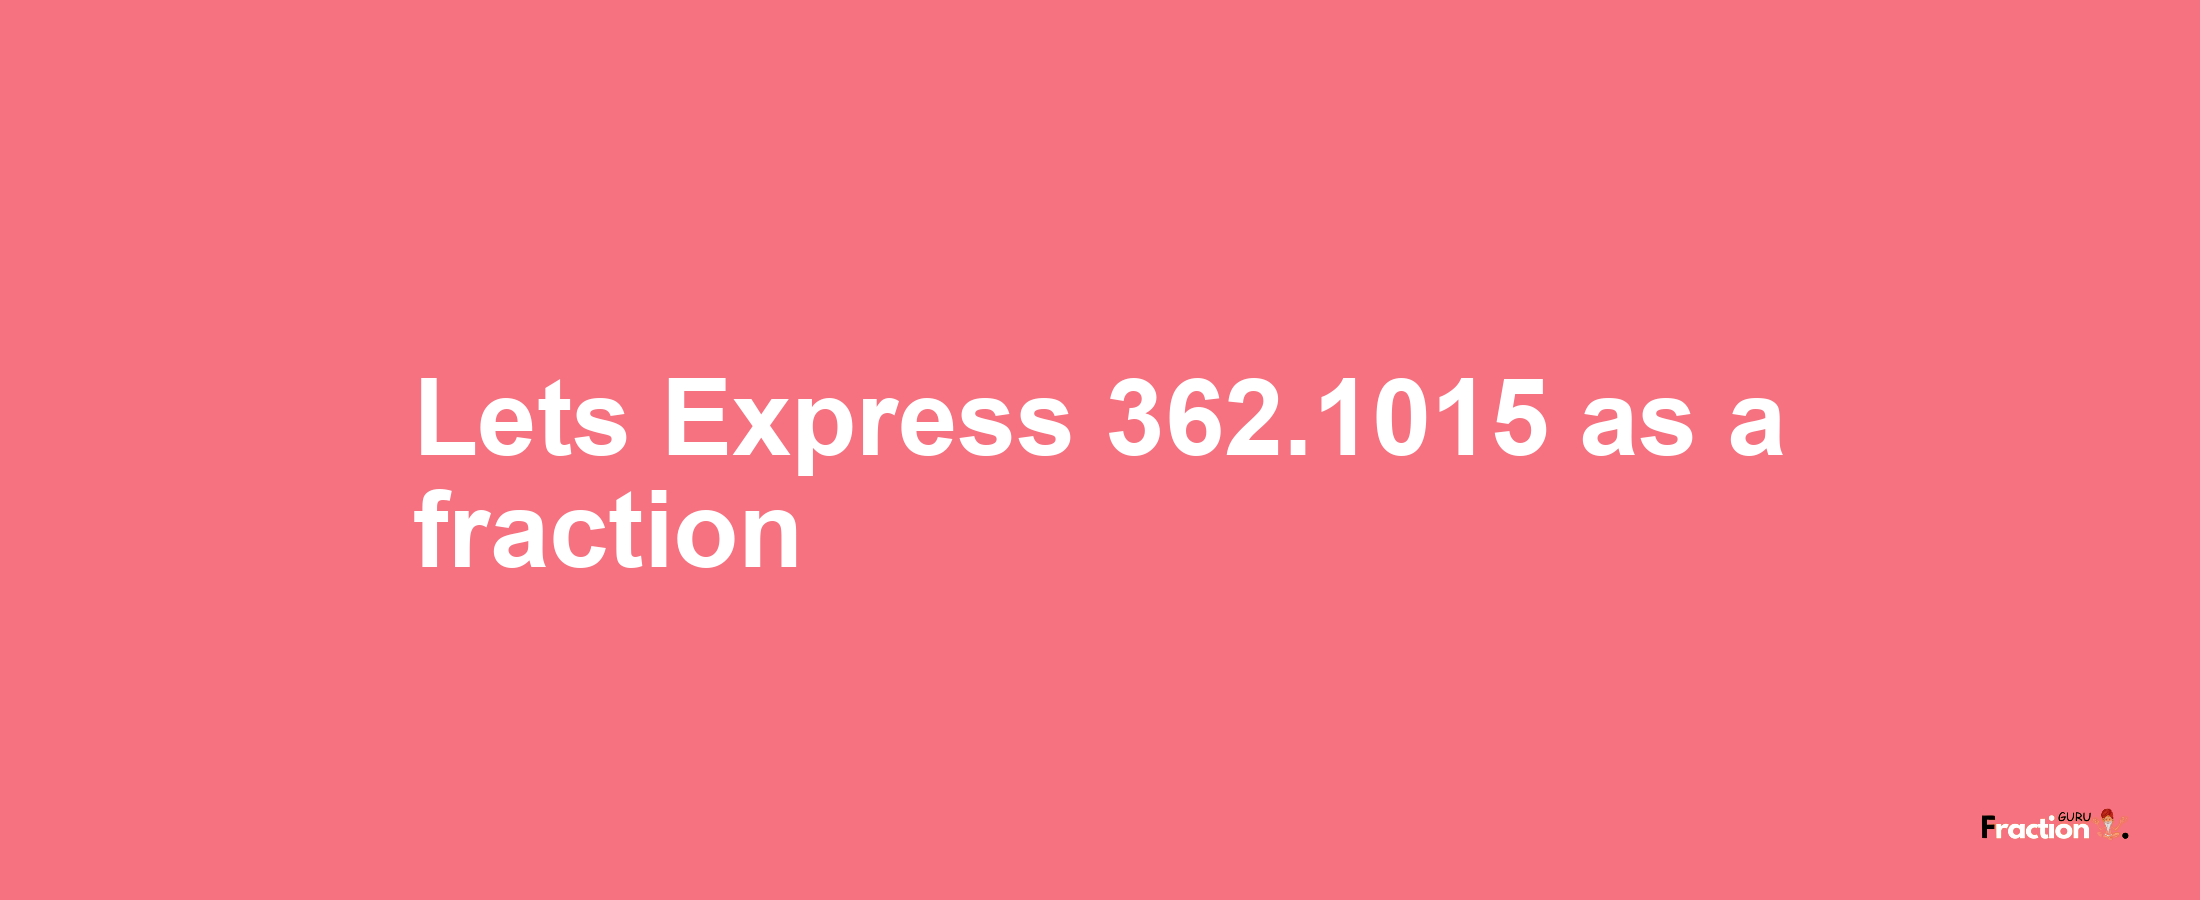 Lets Express 362.1015 as afraction